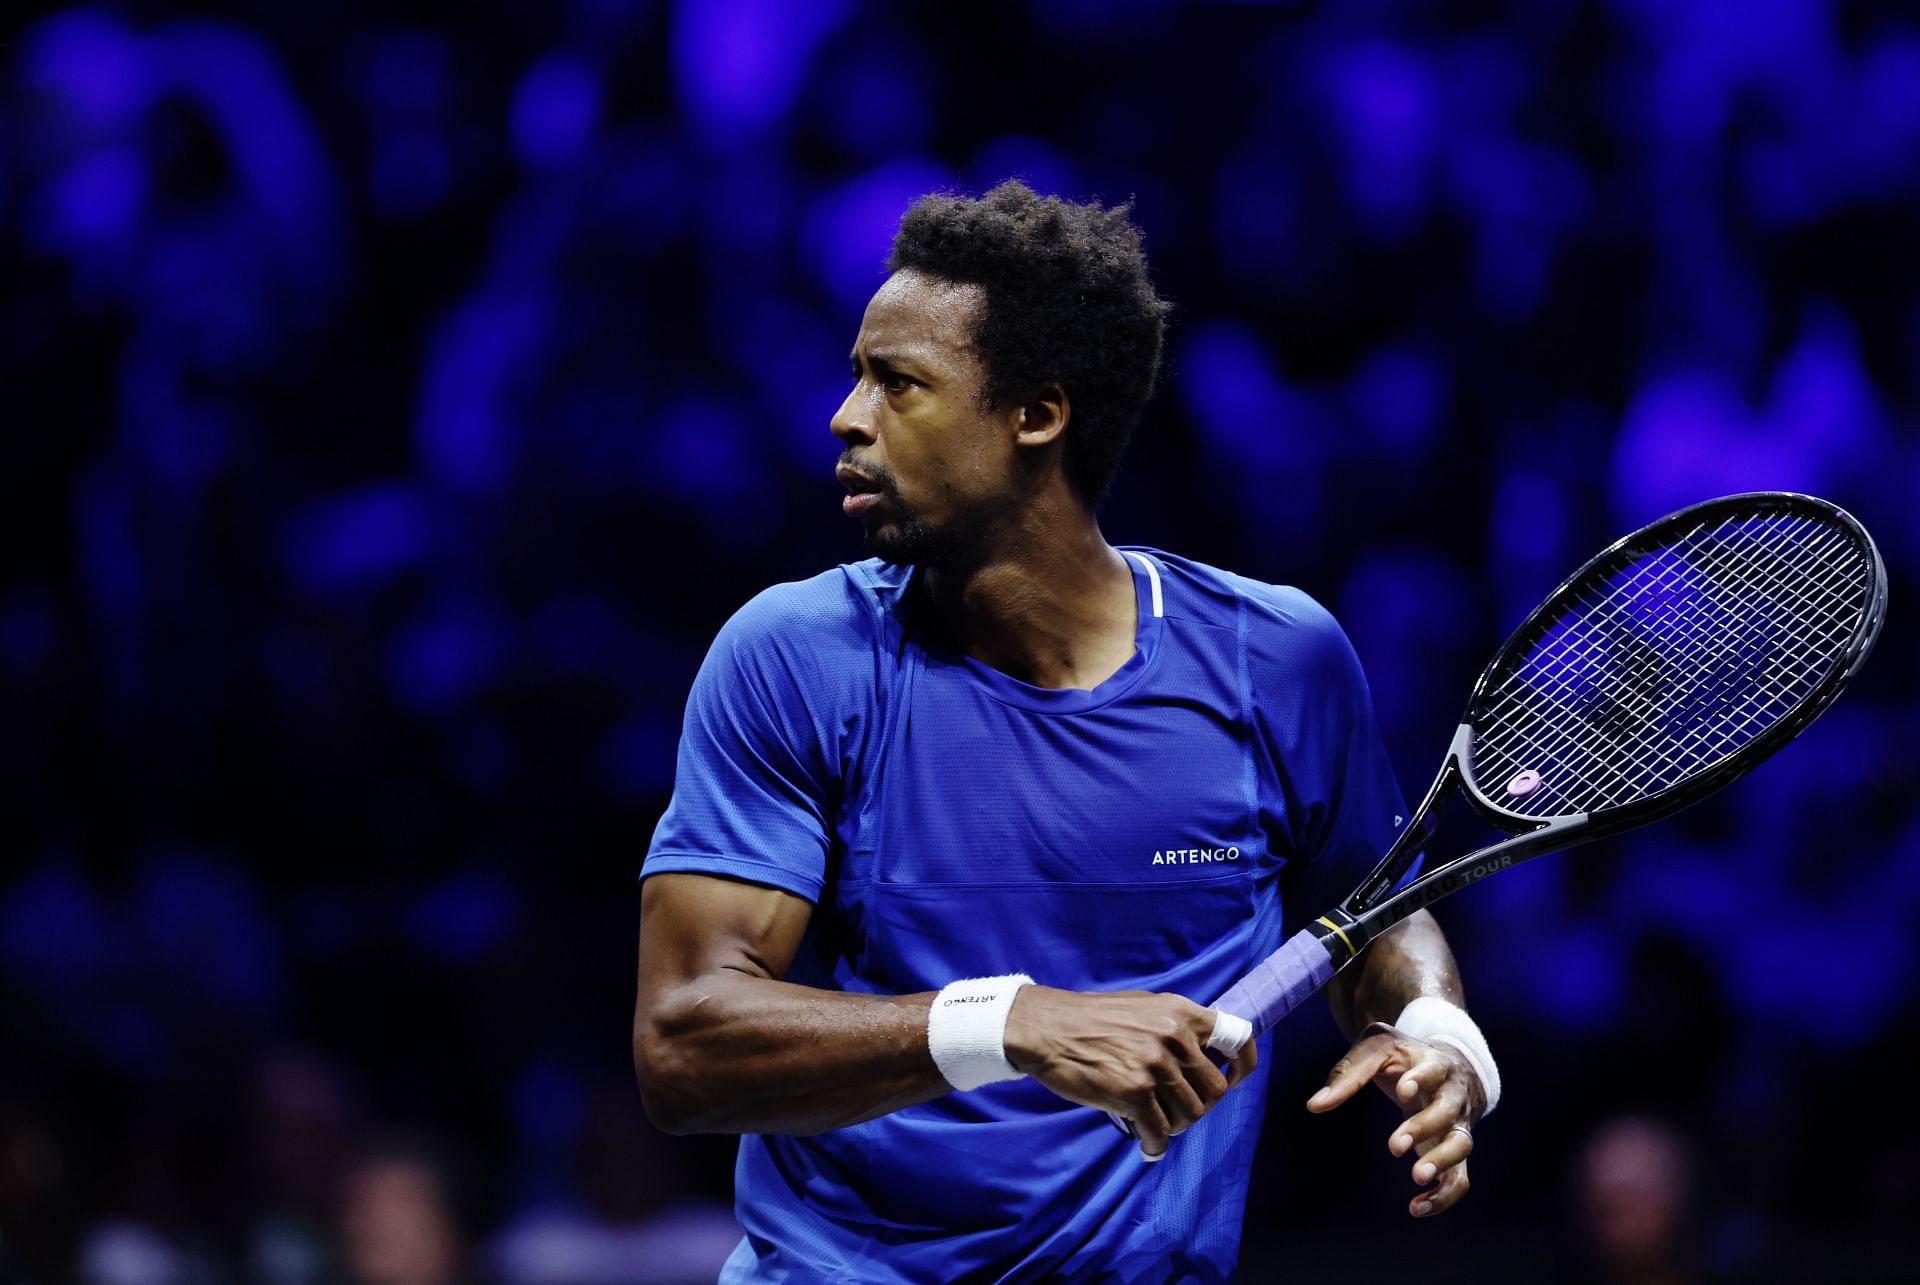 Monfils at the 2023 Laver Cup.